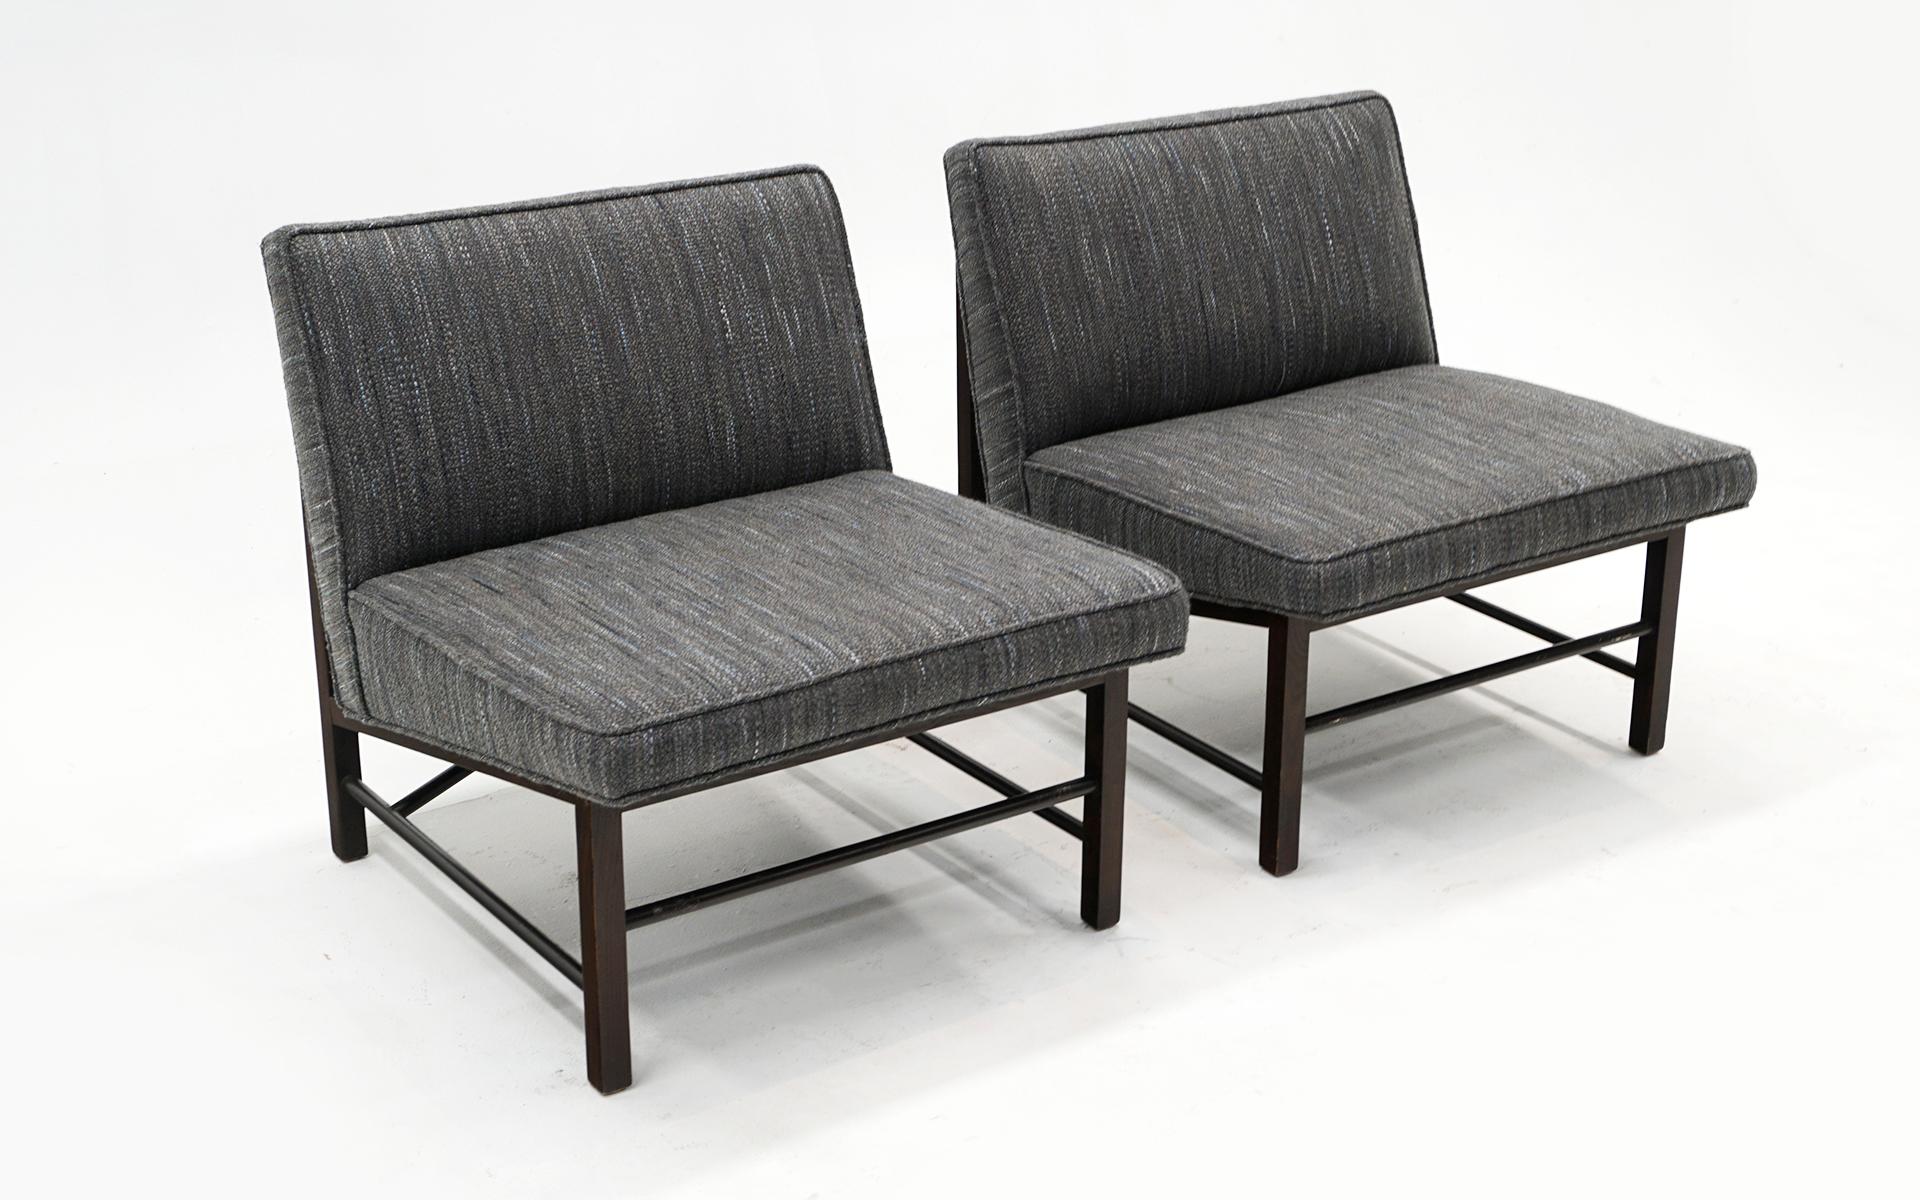 Set of two armless Slipper chairs / lounge chairs designed by Edward Wormley for Dunbar, 1950s. The medium grey. Upholstery has been recently updated and in fine condition with no issues. The mahogany frames, legs and cross stretchers show minimal